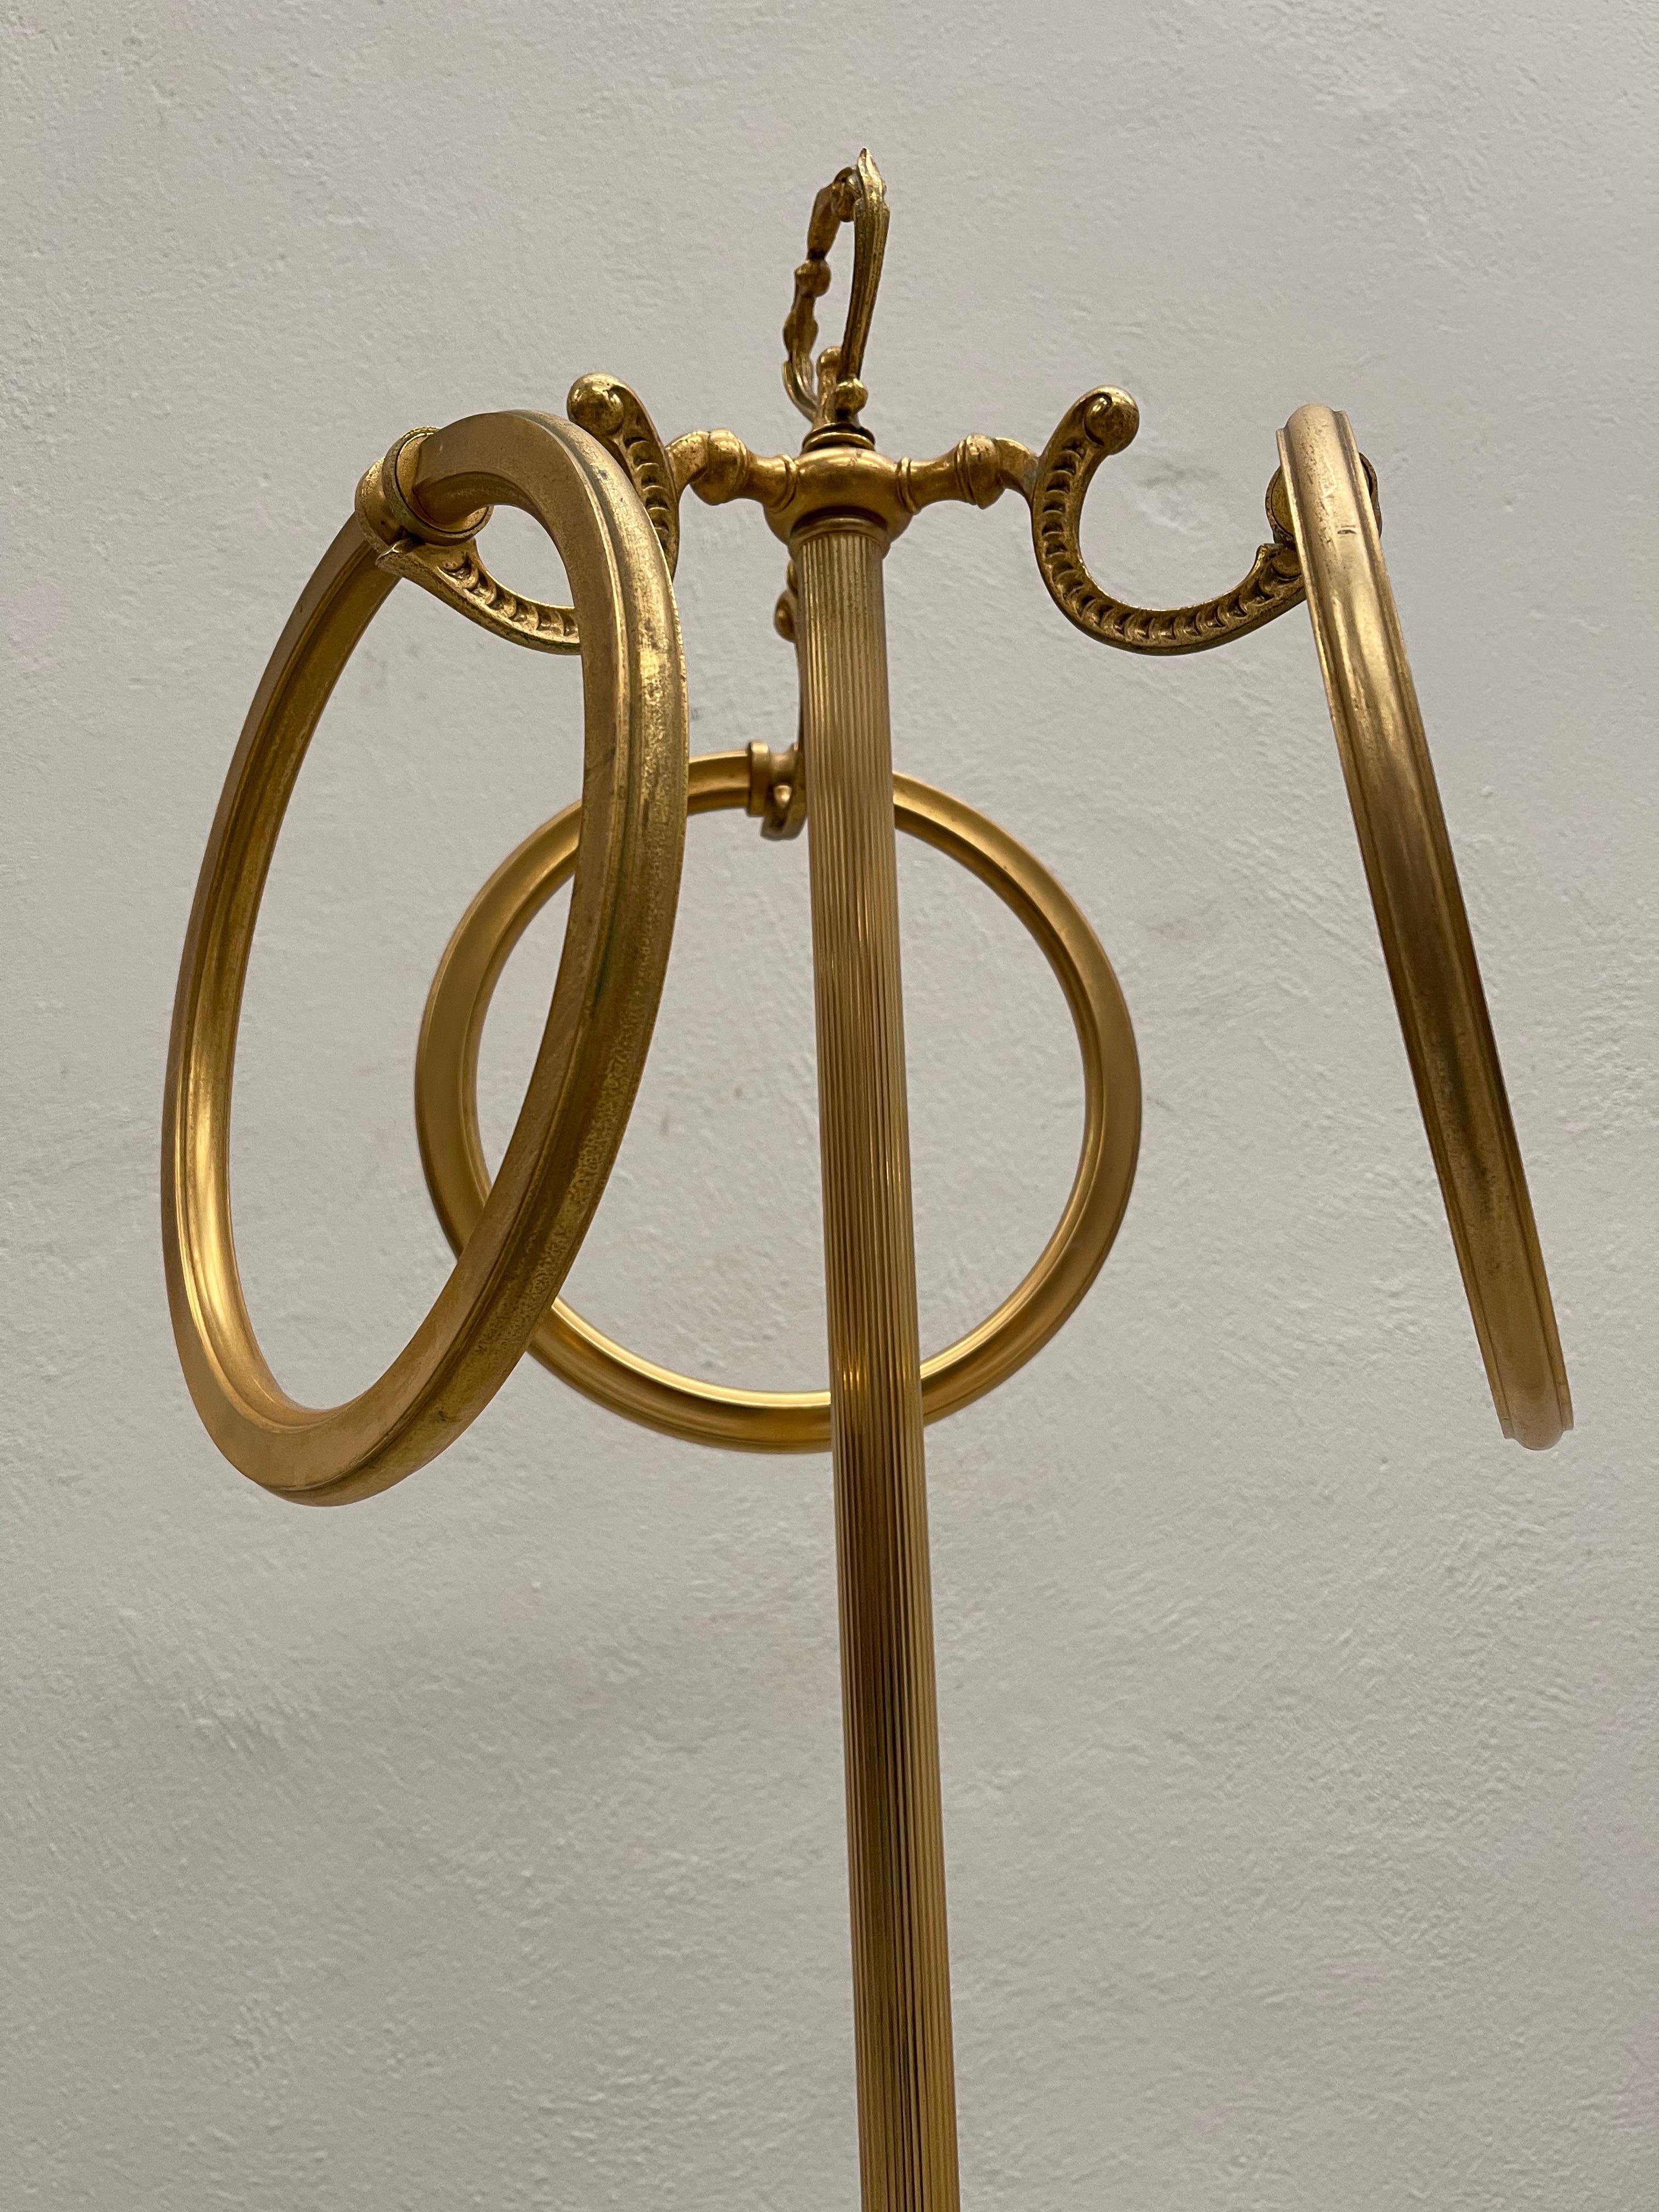 Late 20th Century Exclusive gold-plated brass floor towel rack For Sale